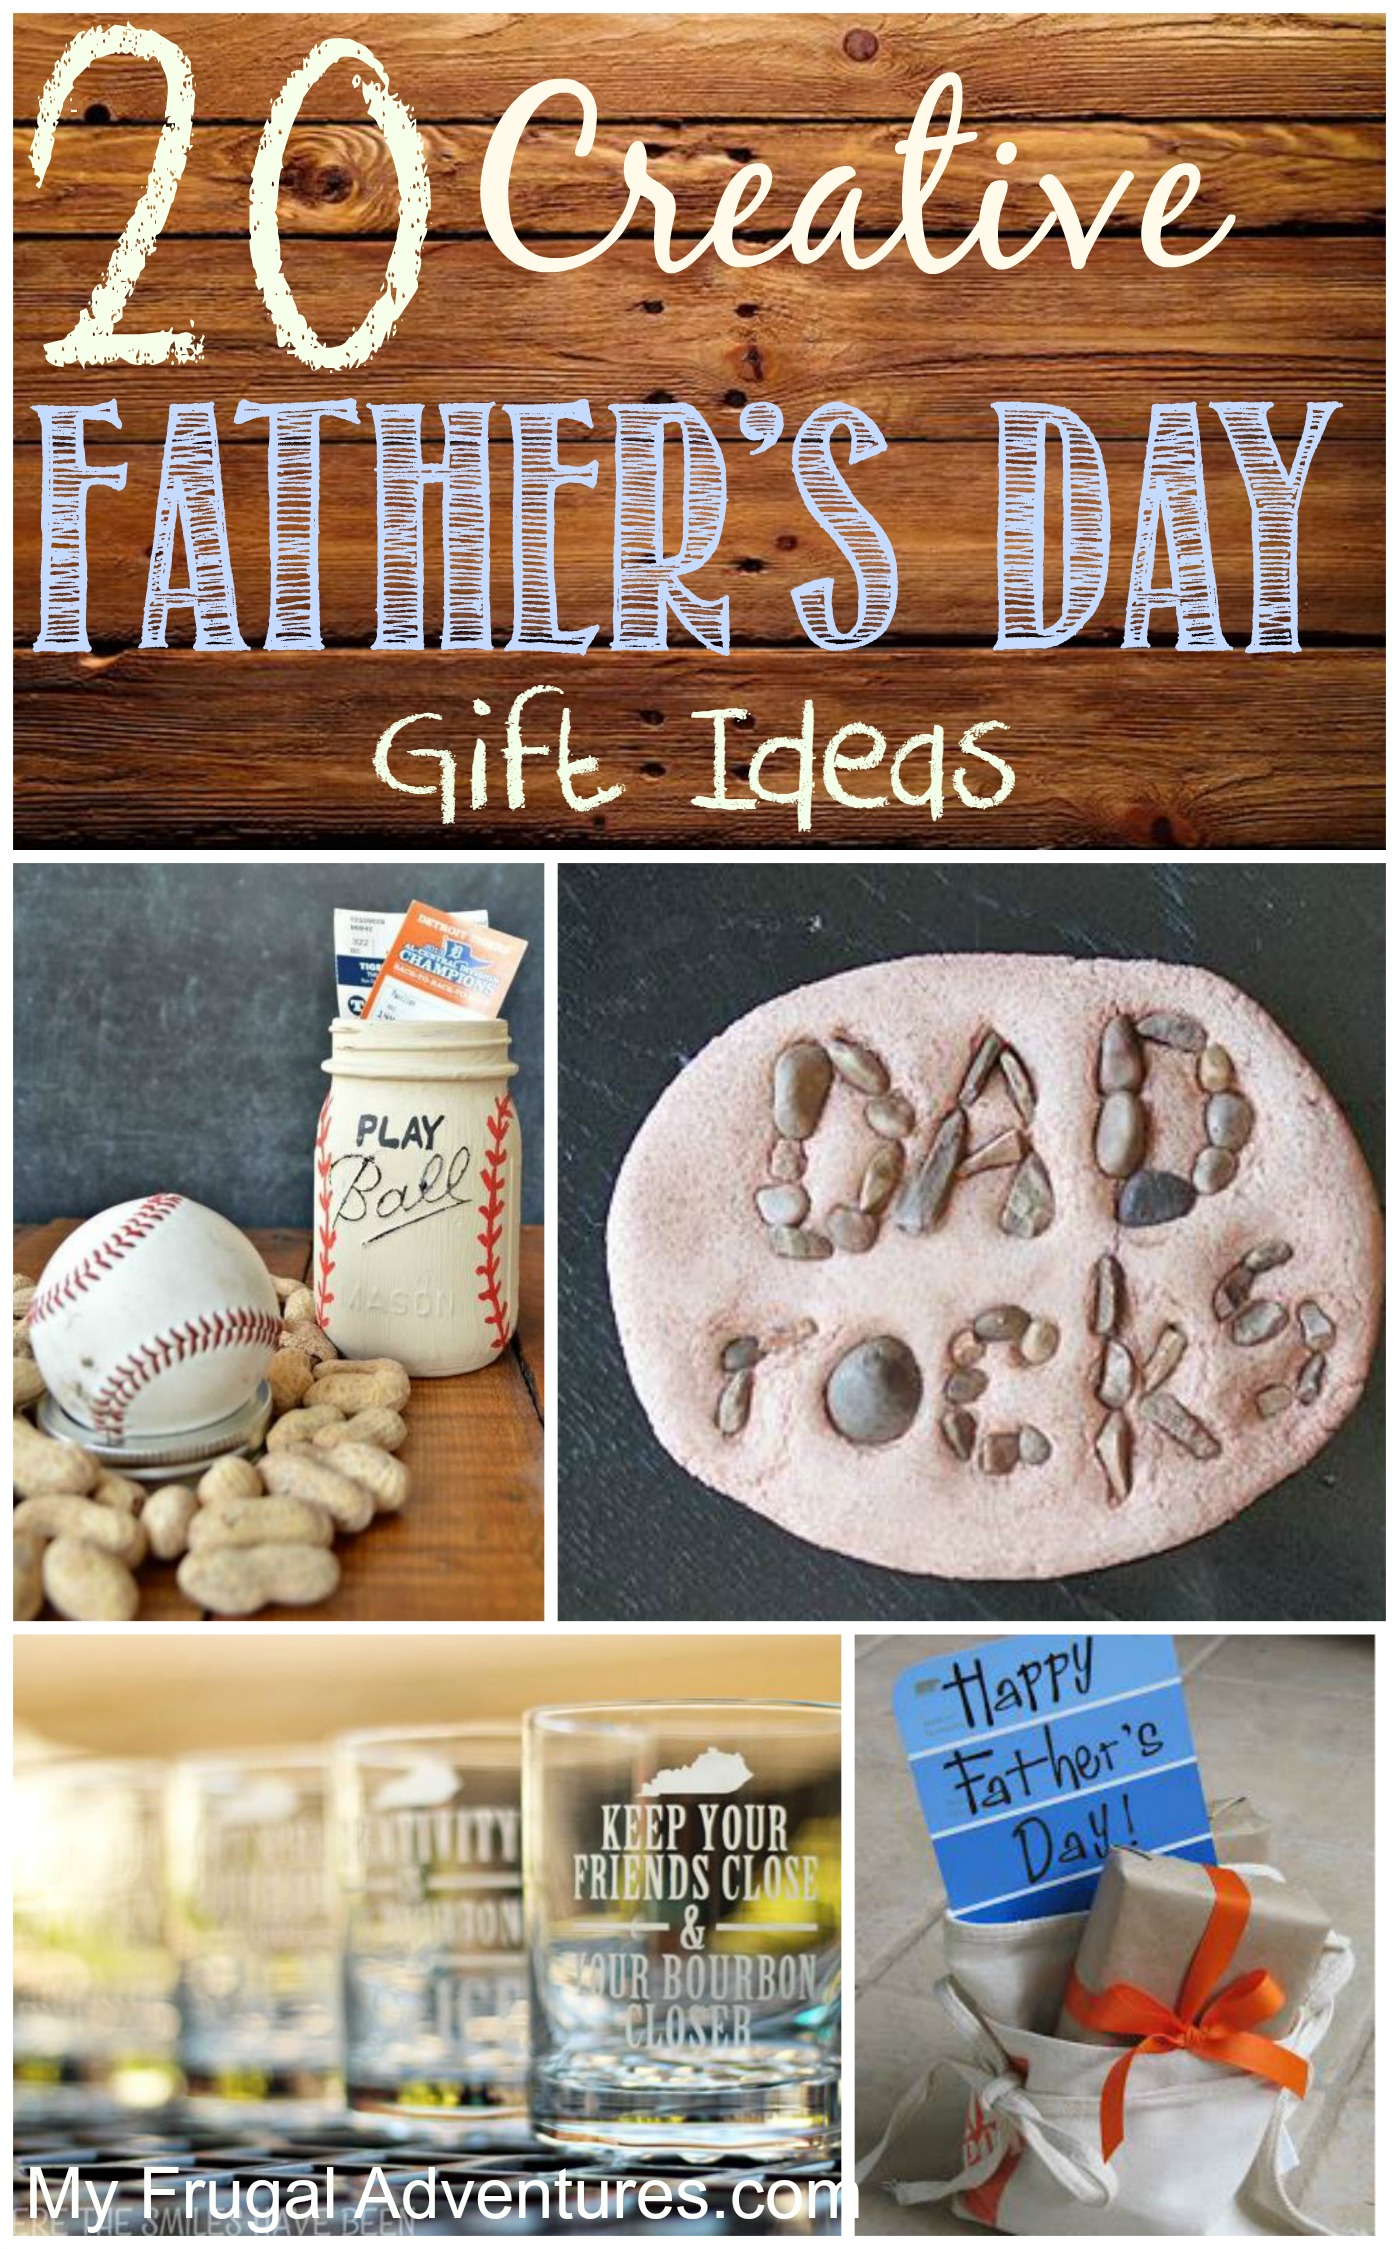 DIY Father's Day Gifts Rocks: Get Crafty and Show Love